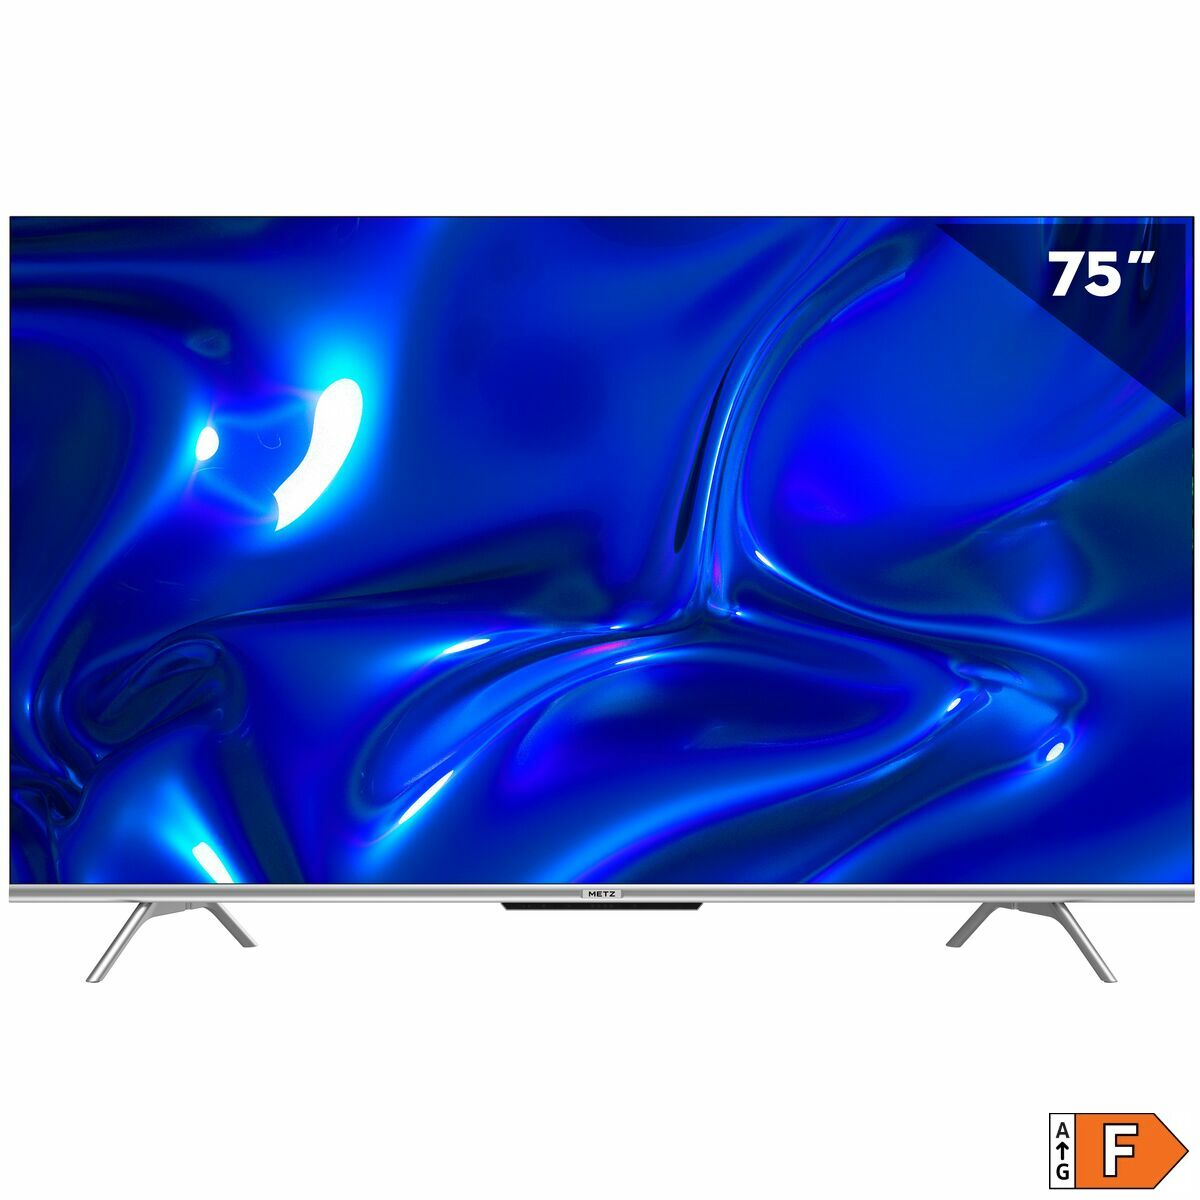 Smart TV Metz 75MUD7000Z Full HD 75" LED, Metz, Electronics, TV, Video and home cinema, smart-tv-metz-75mud7000z-full-hd-75-led, Brand_Metz, category-reference-2609, category-reference-2625, category-reference-2931, category-reference-t-18805, category-reference-t-18827, category-reference-t-19653, cinema and television, Condition_NEW, entertainment, Price_700 - 800, UEFA Euro 2020, RiotNook